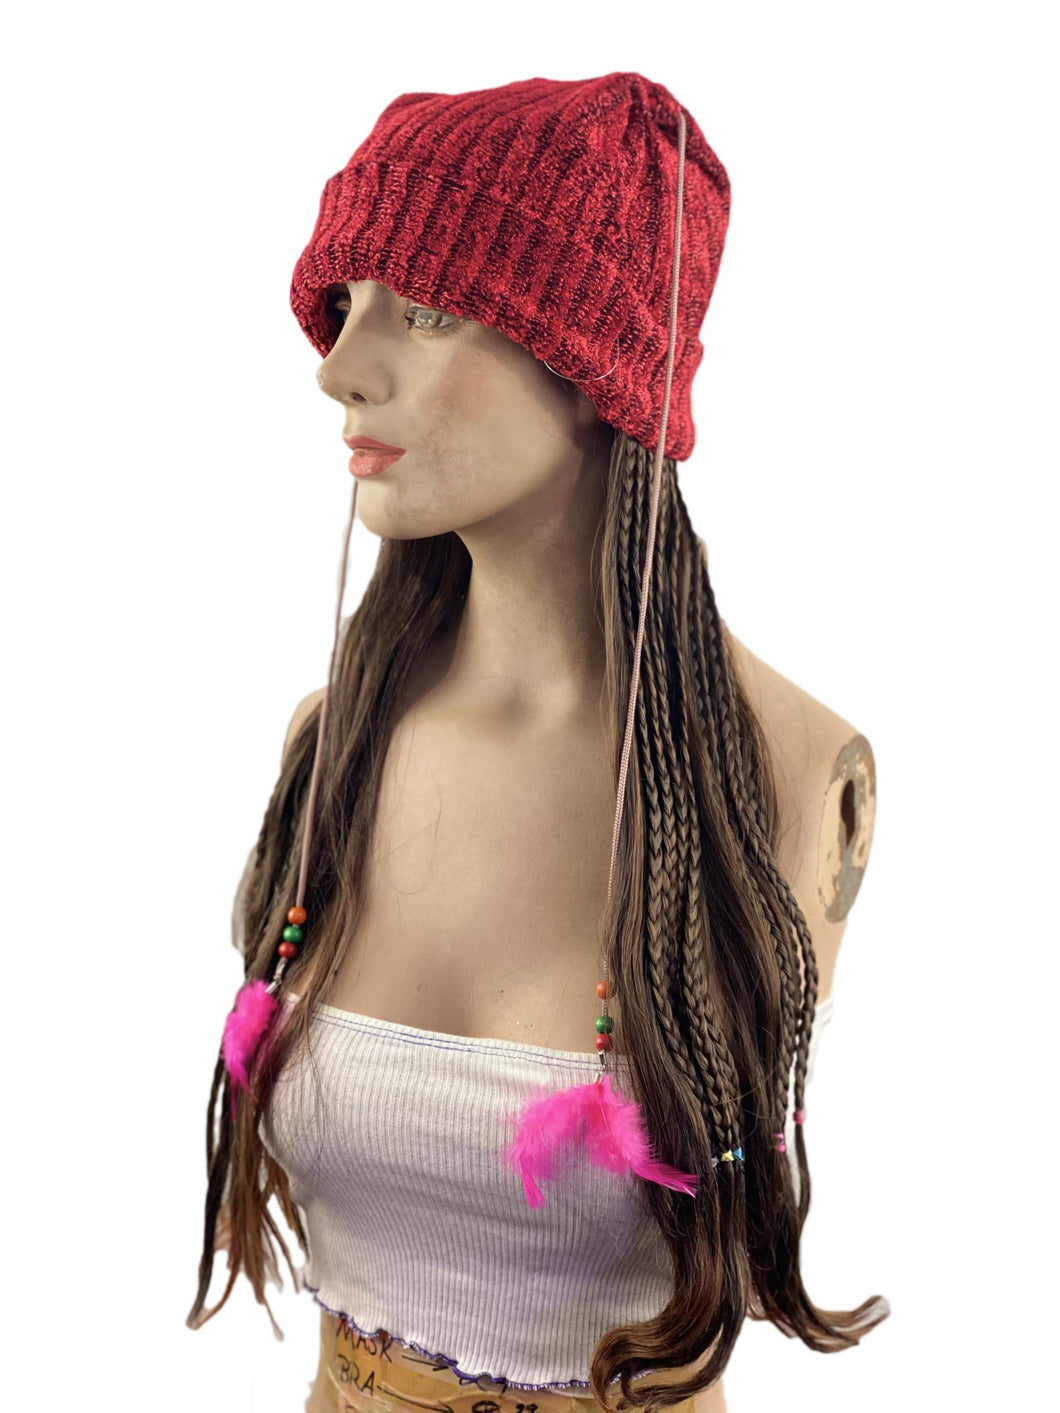 Women's Knit Beanie Cap with Attached Hair Mixed Braids with Beads and Feathers